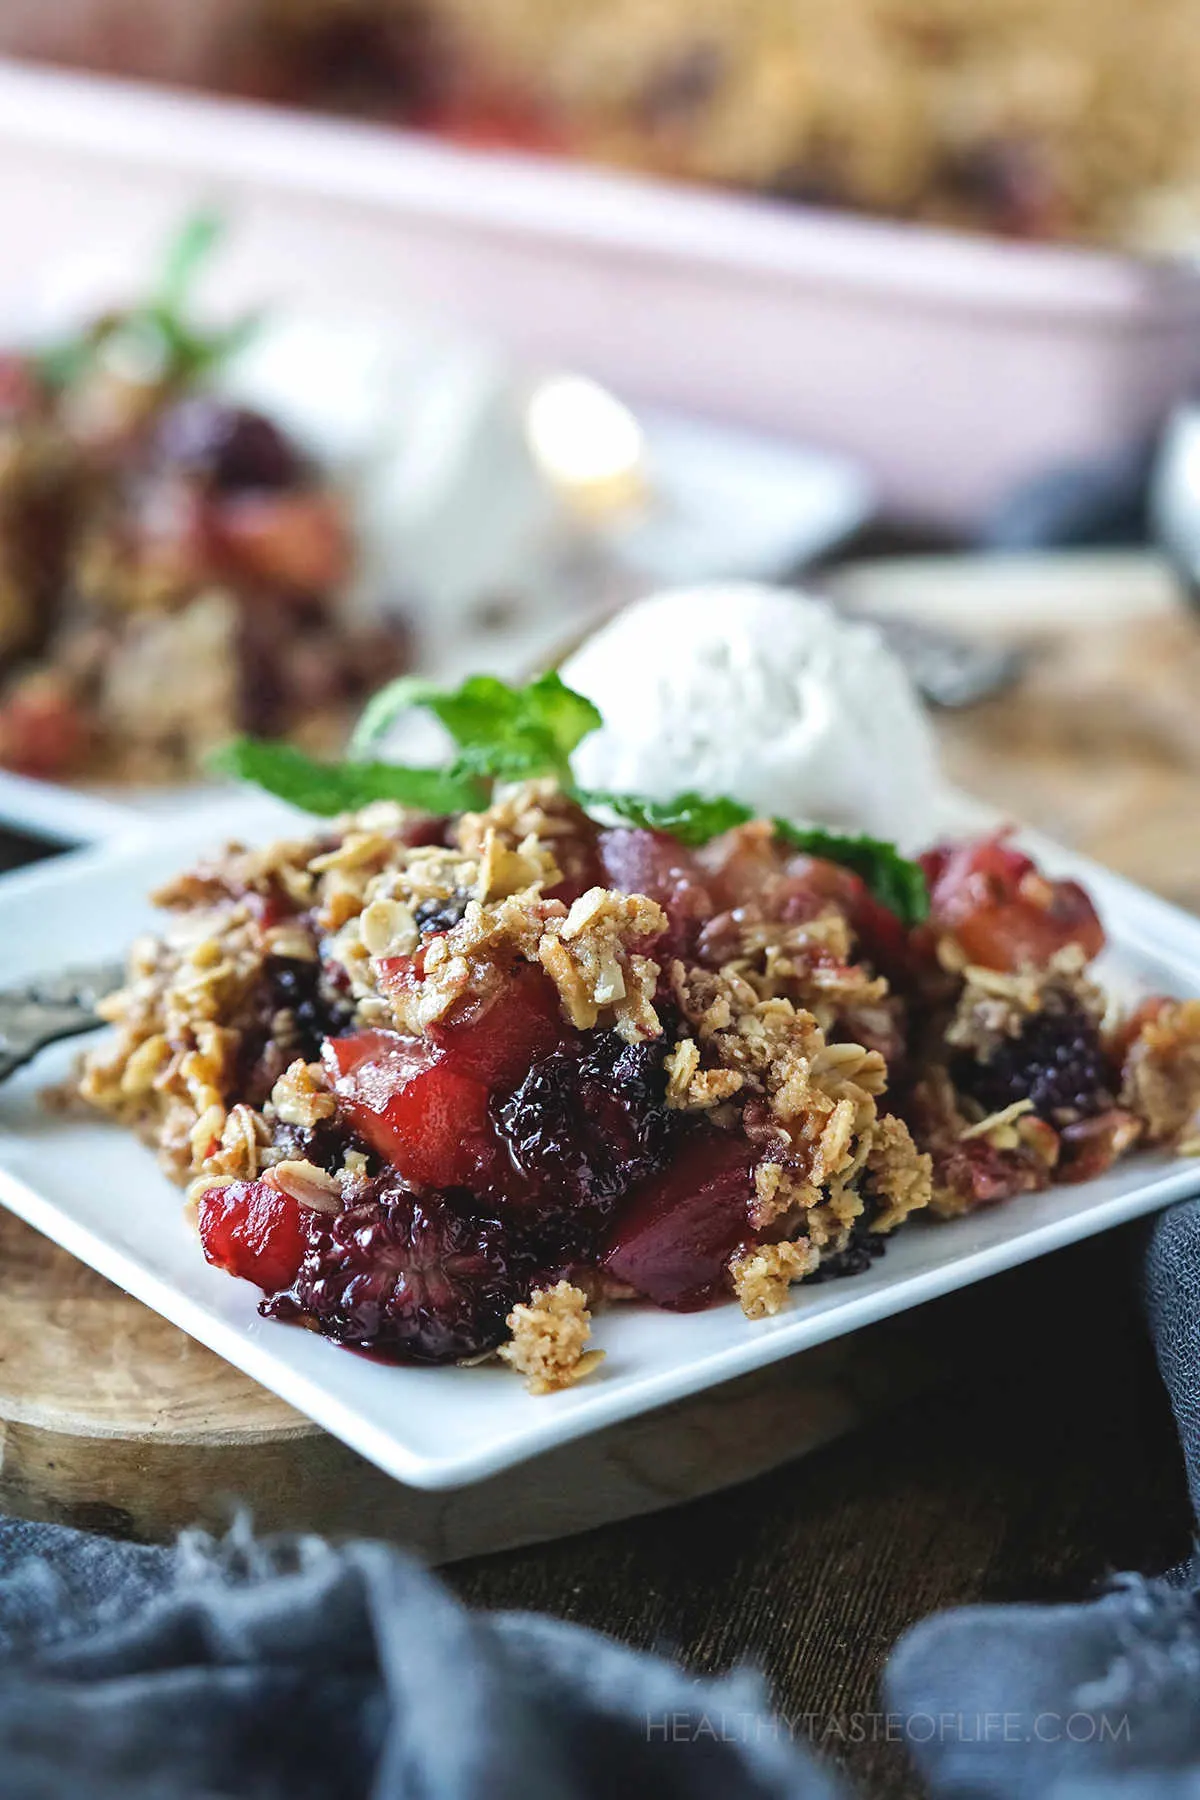 Perfectly baked apple blackberry crumble.   